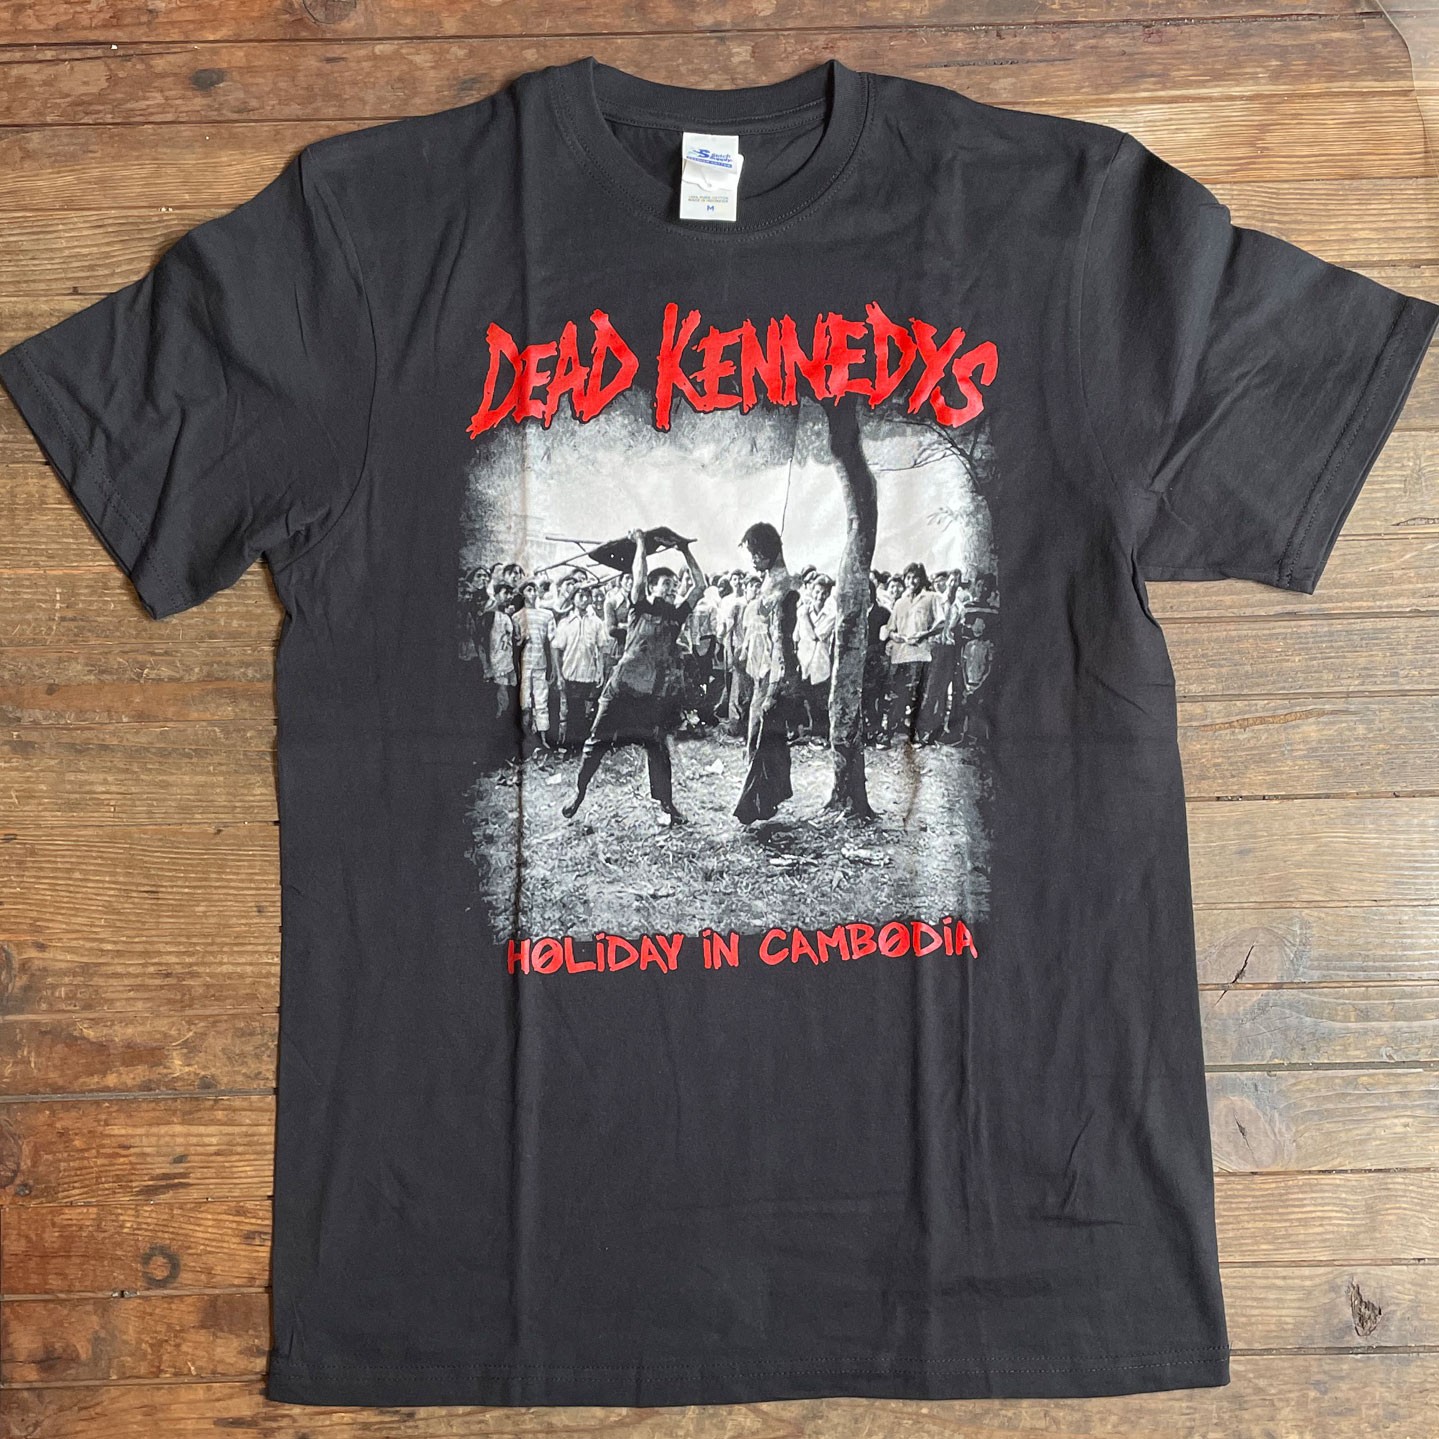 DEAD KENNEDYS Tシャツ HOLIDAY IN CAMBODIA 6